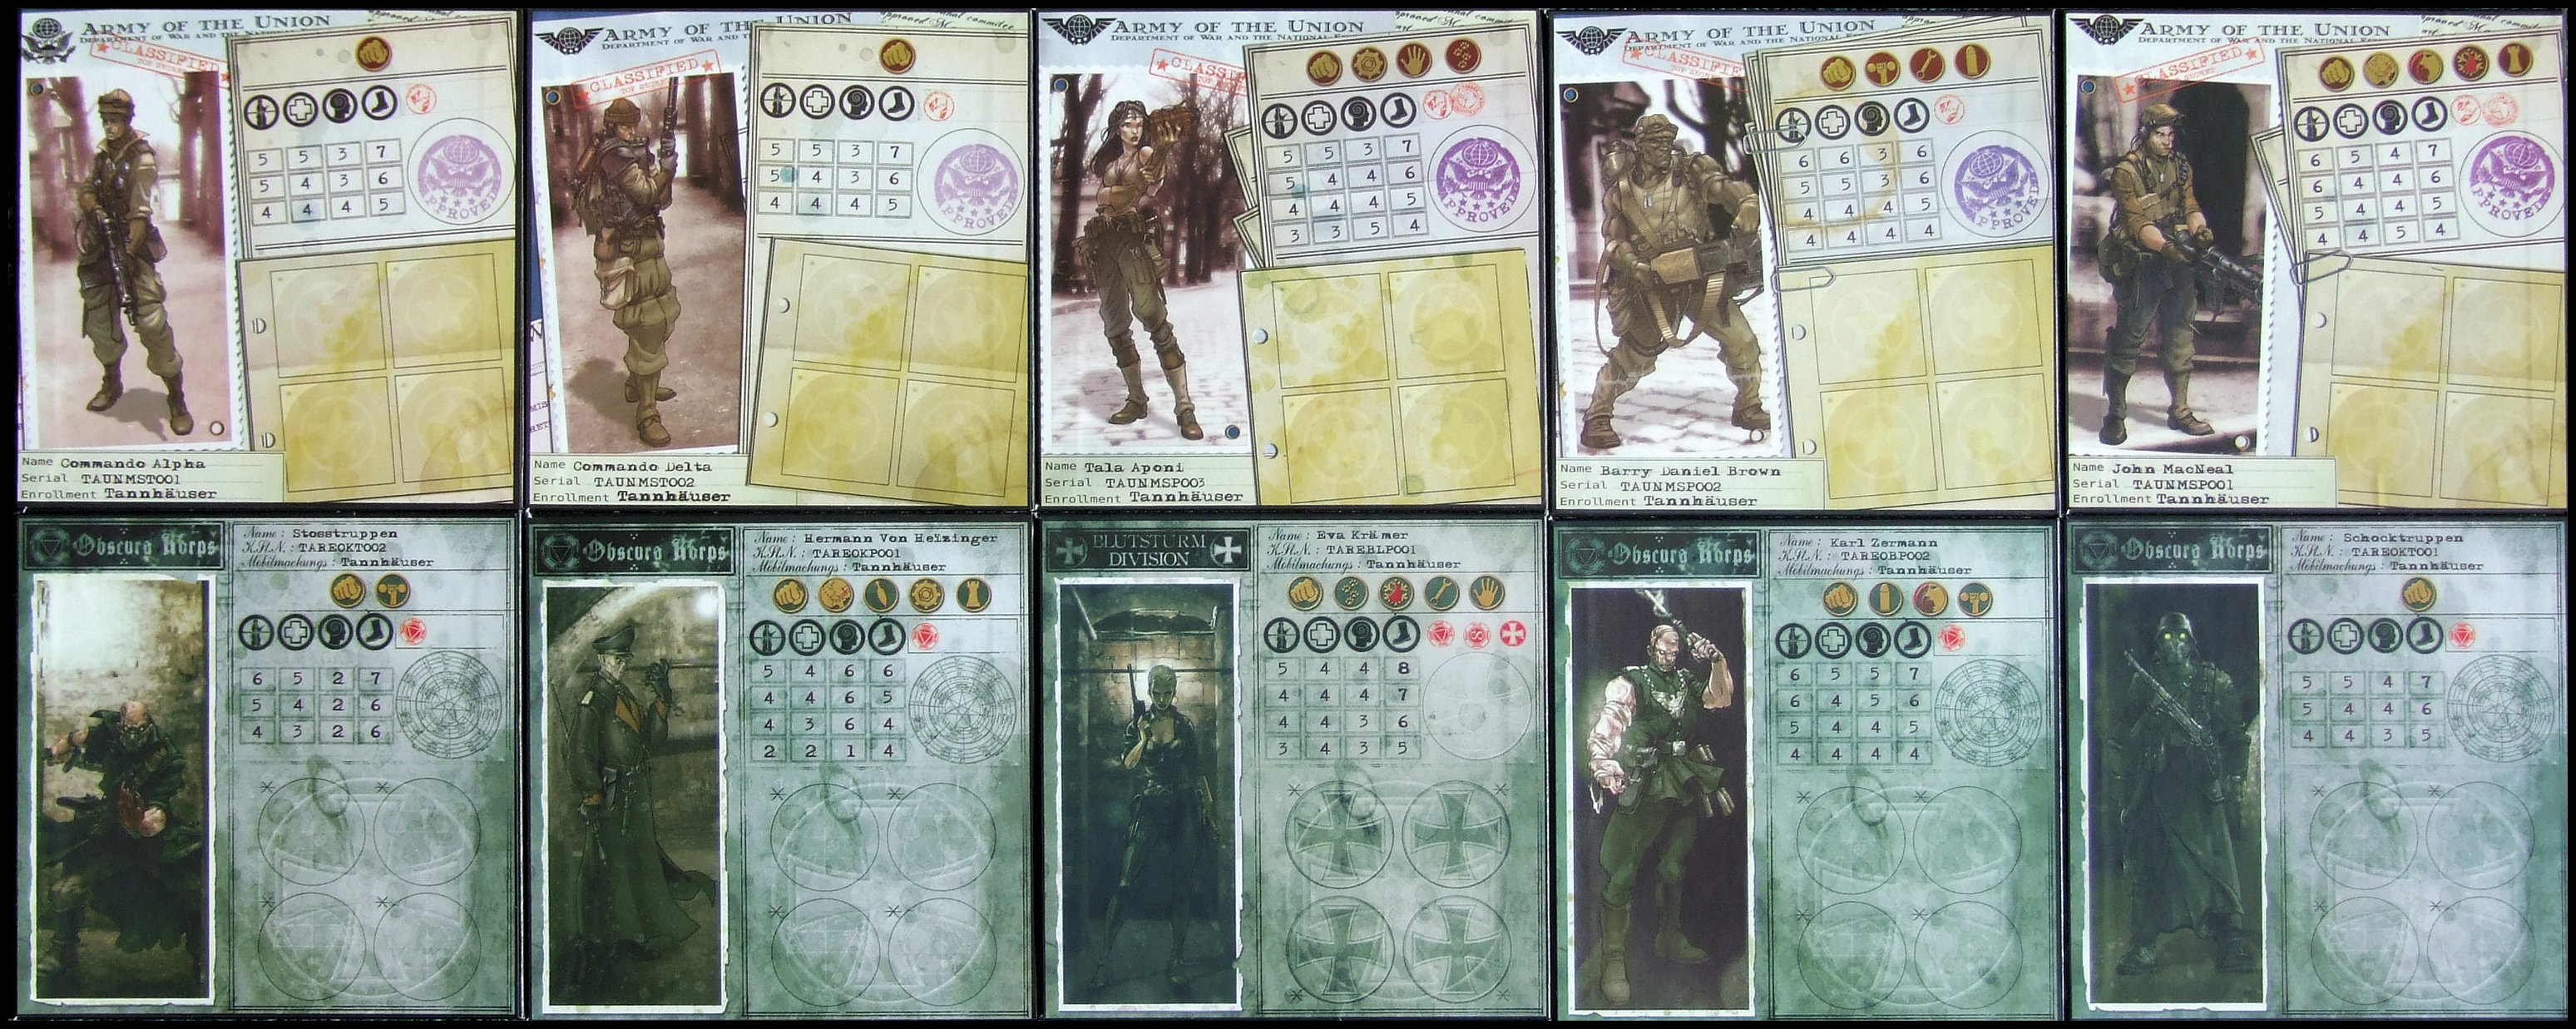 Tannhauser - Character Boards